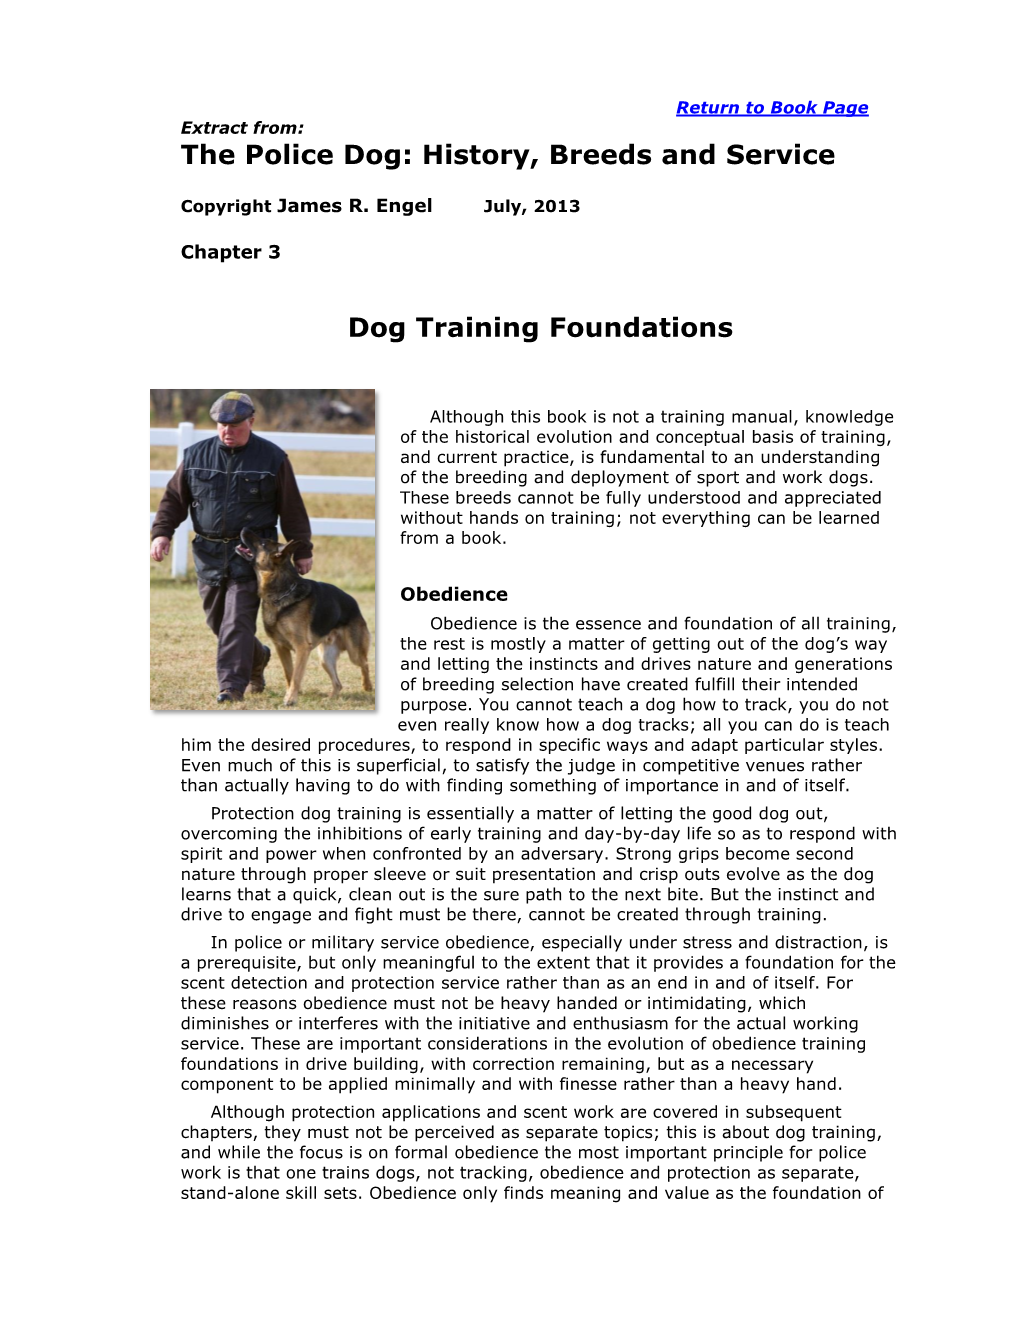 The Police Dog: History, Breeds and Service Dog Training Foundations